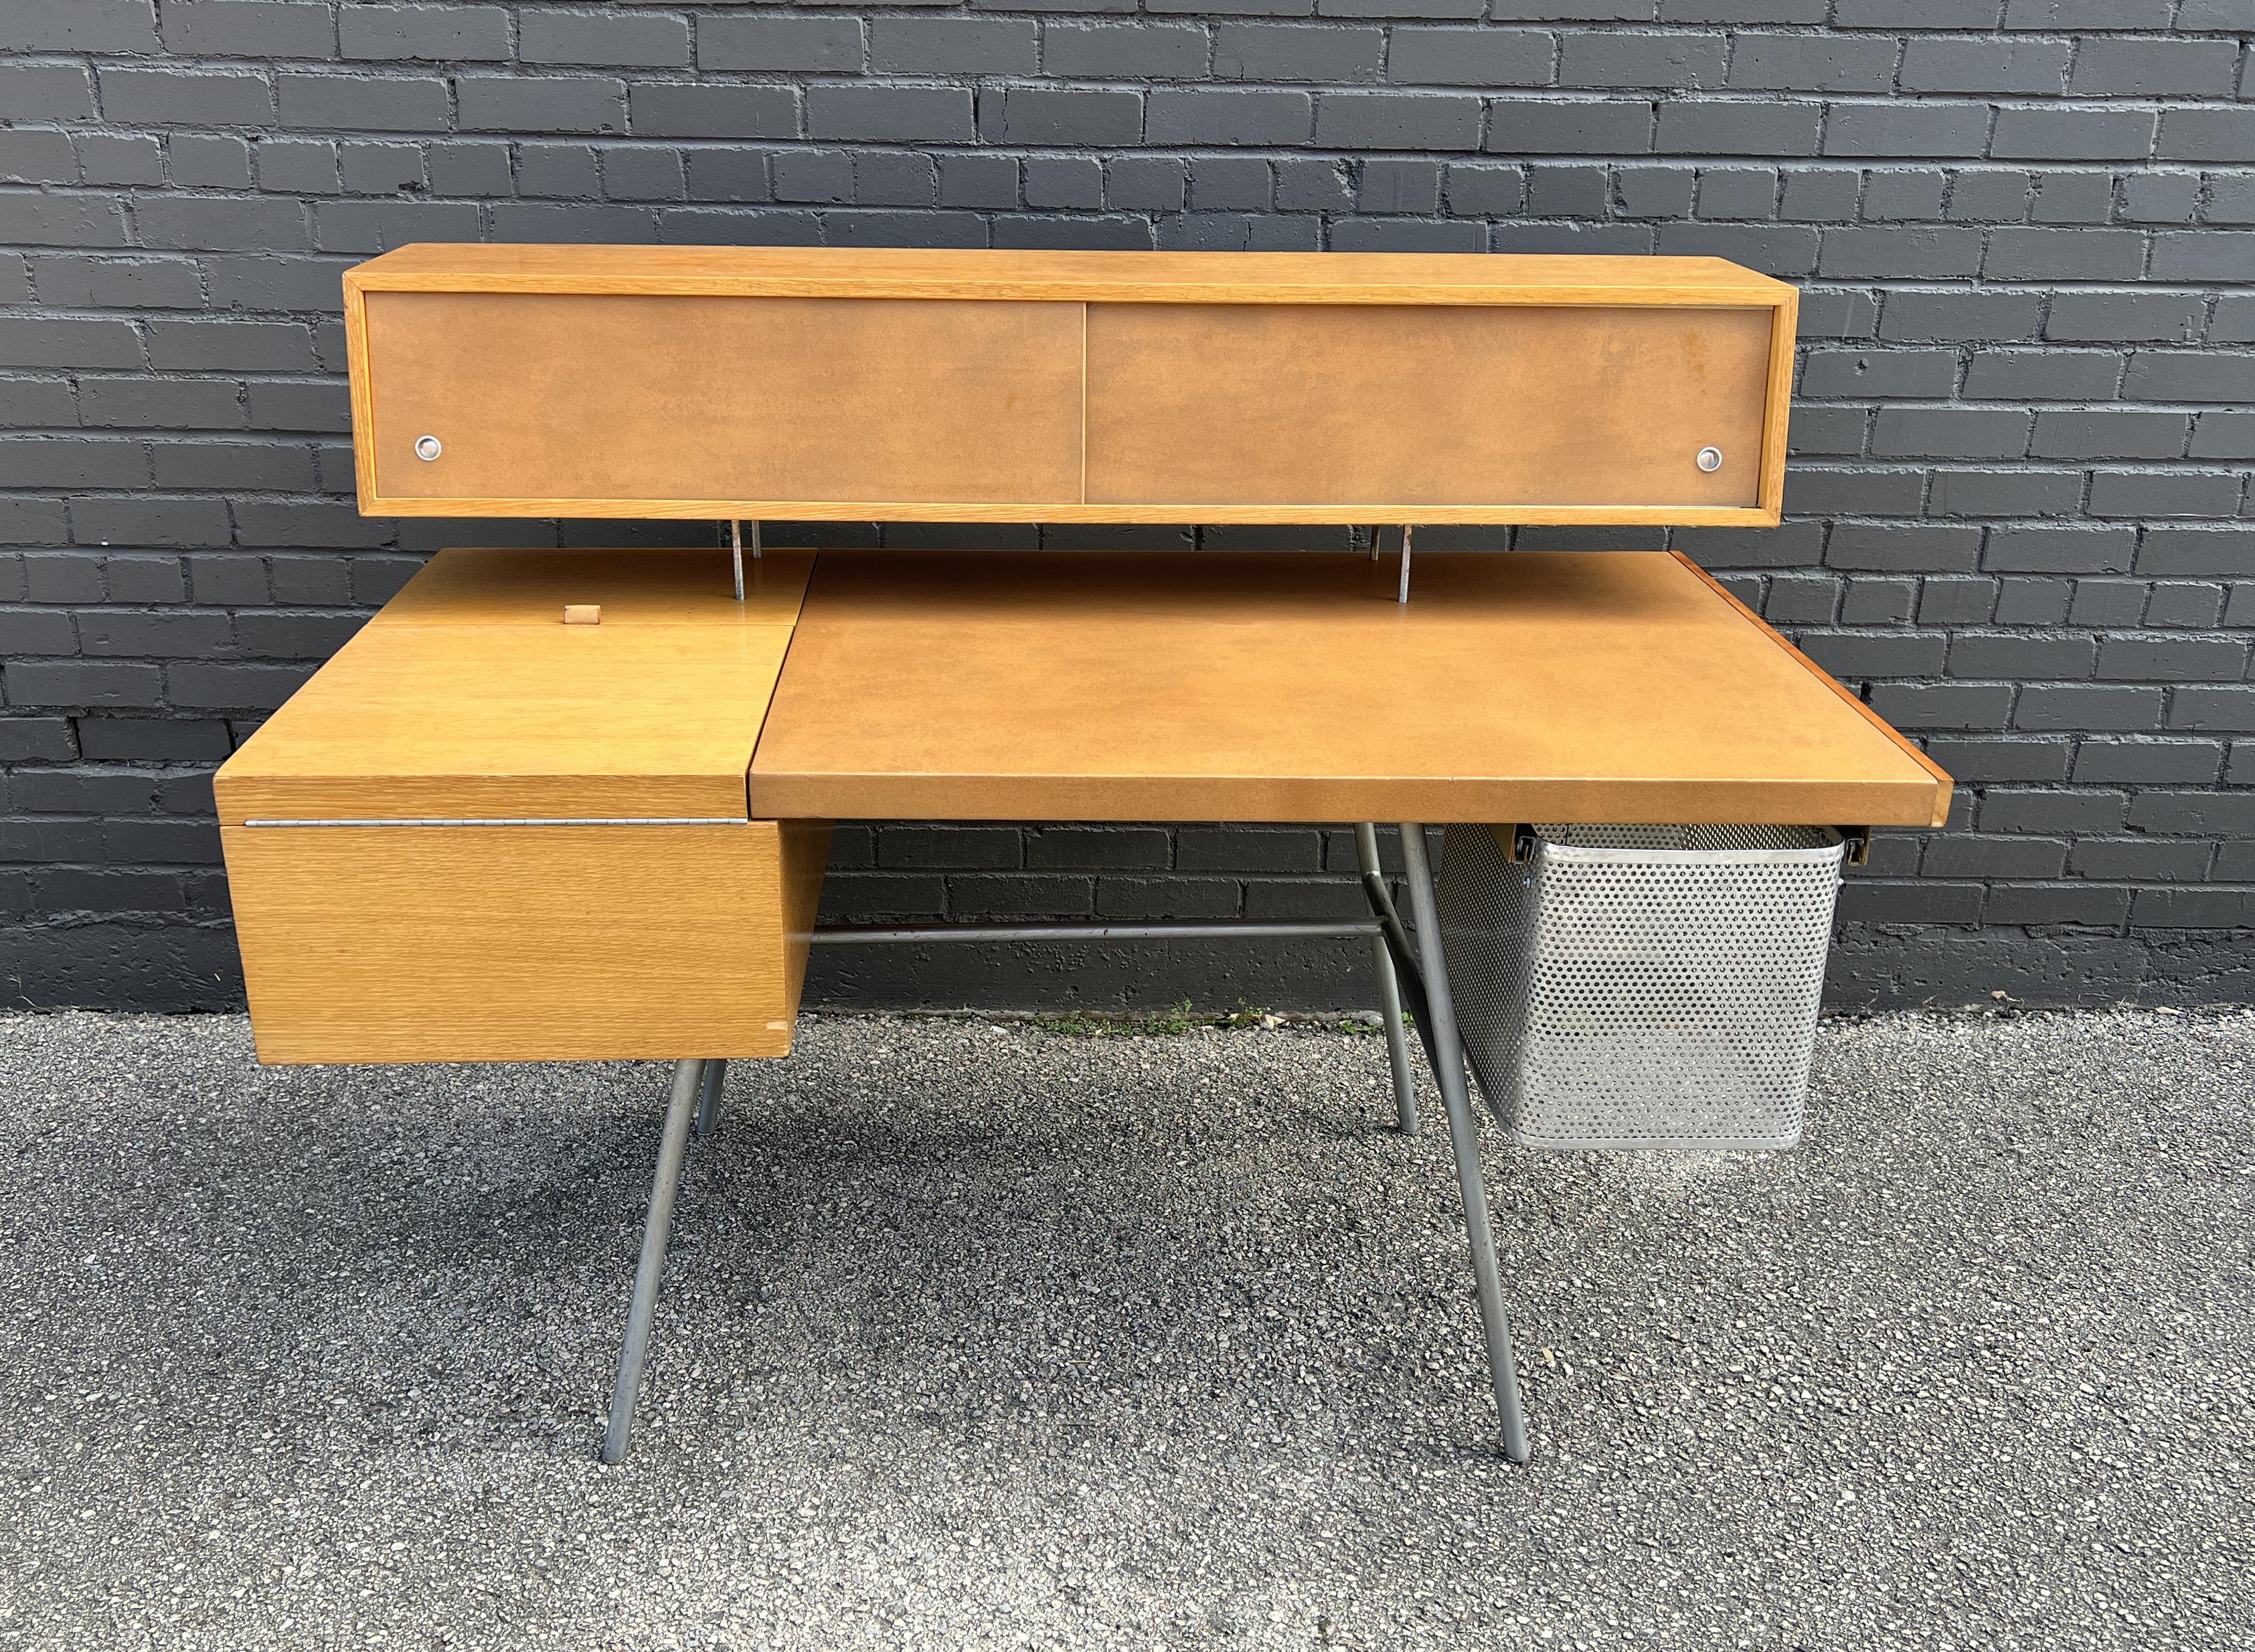 George Nelson & Associates
Home Office desk, model 4658
Manufactured by Herman Miller
USA, 1946
This example is constructed of combed oak, chrome-plated steel, aluminum, and leather.

The desk features a flip-top compartment concealing three